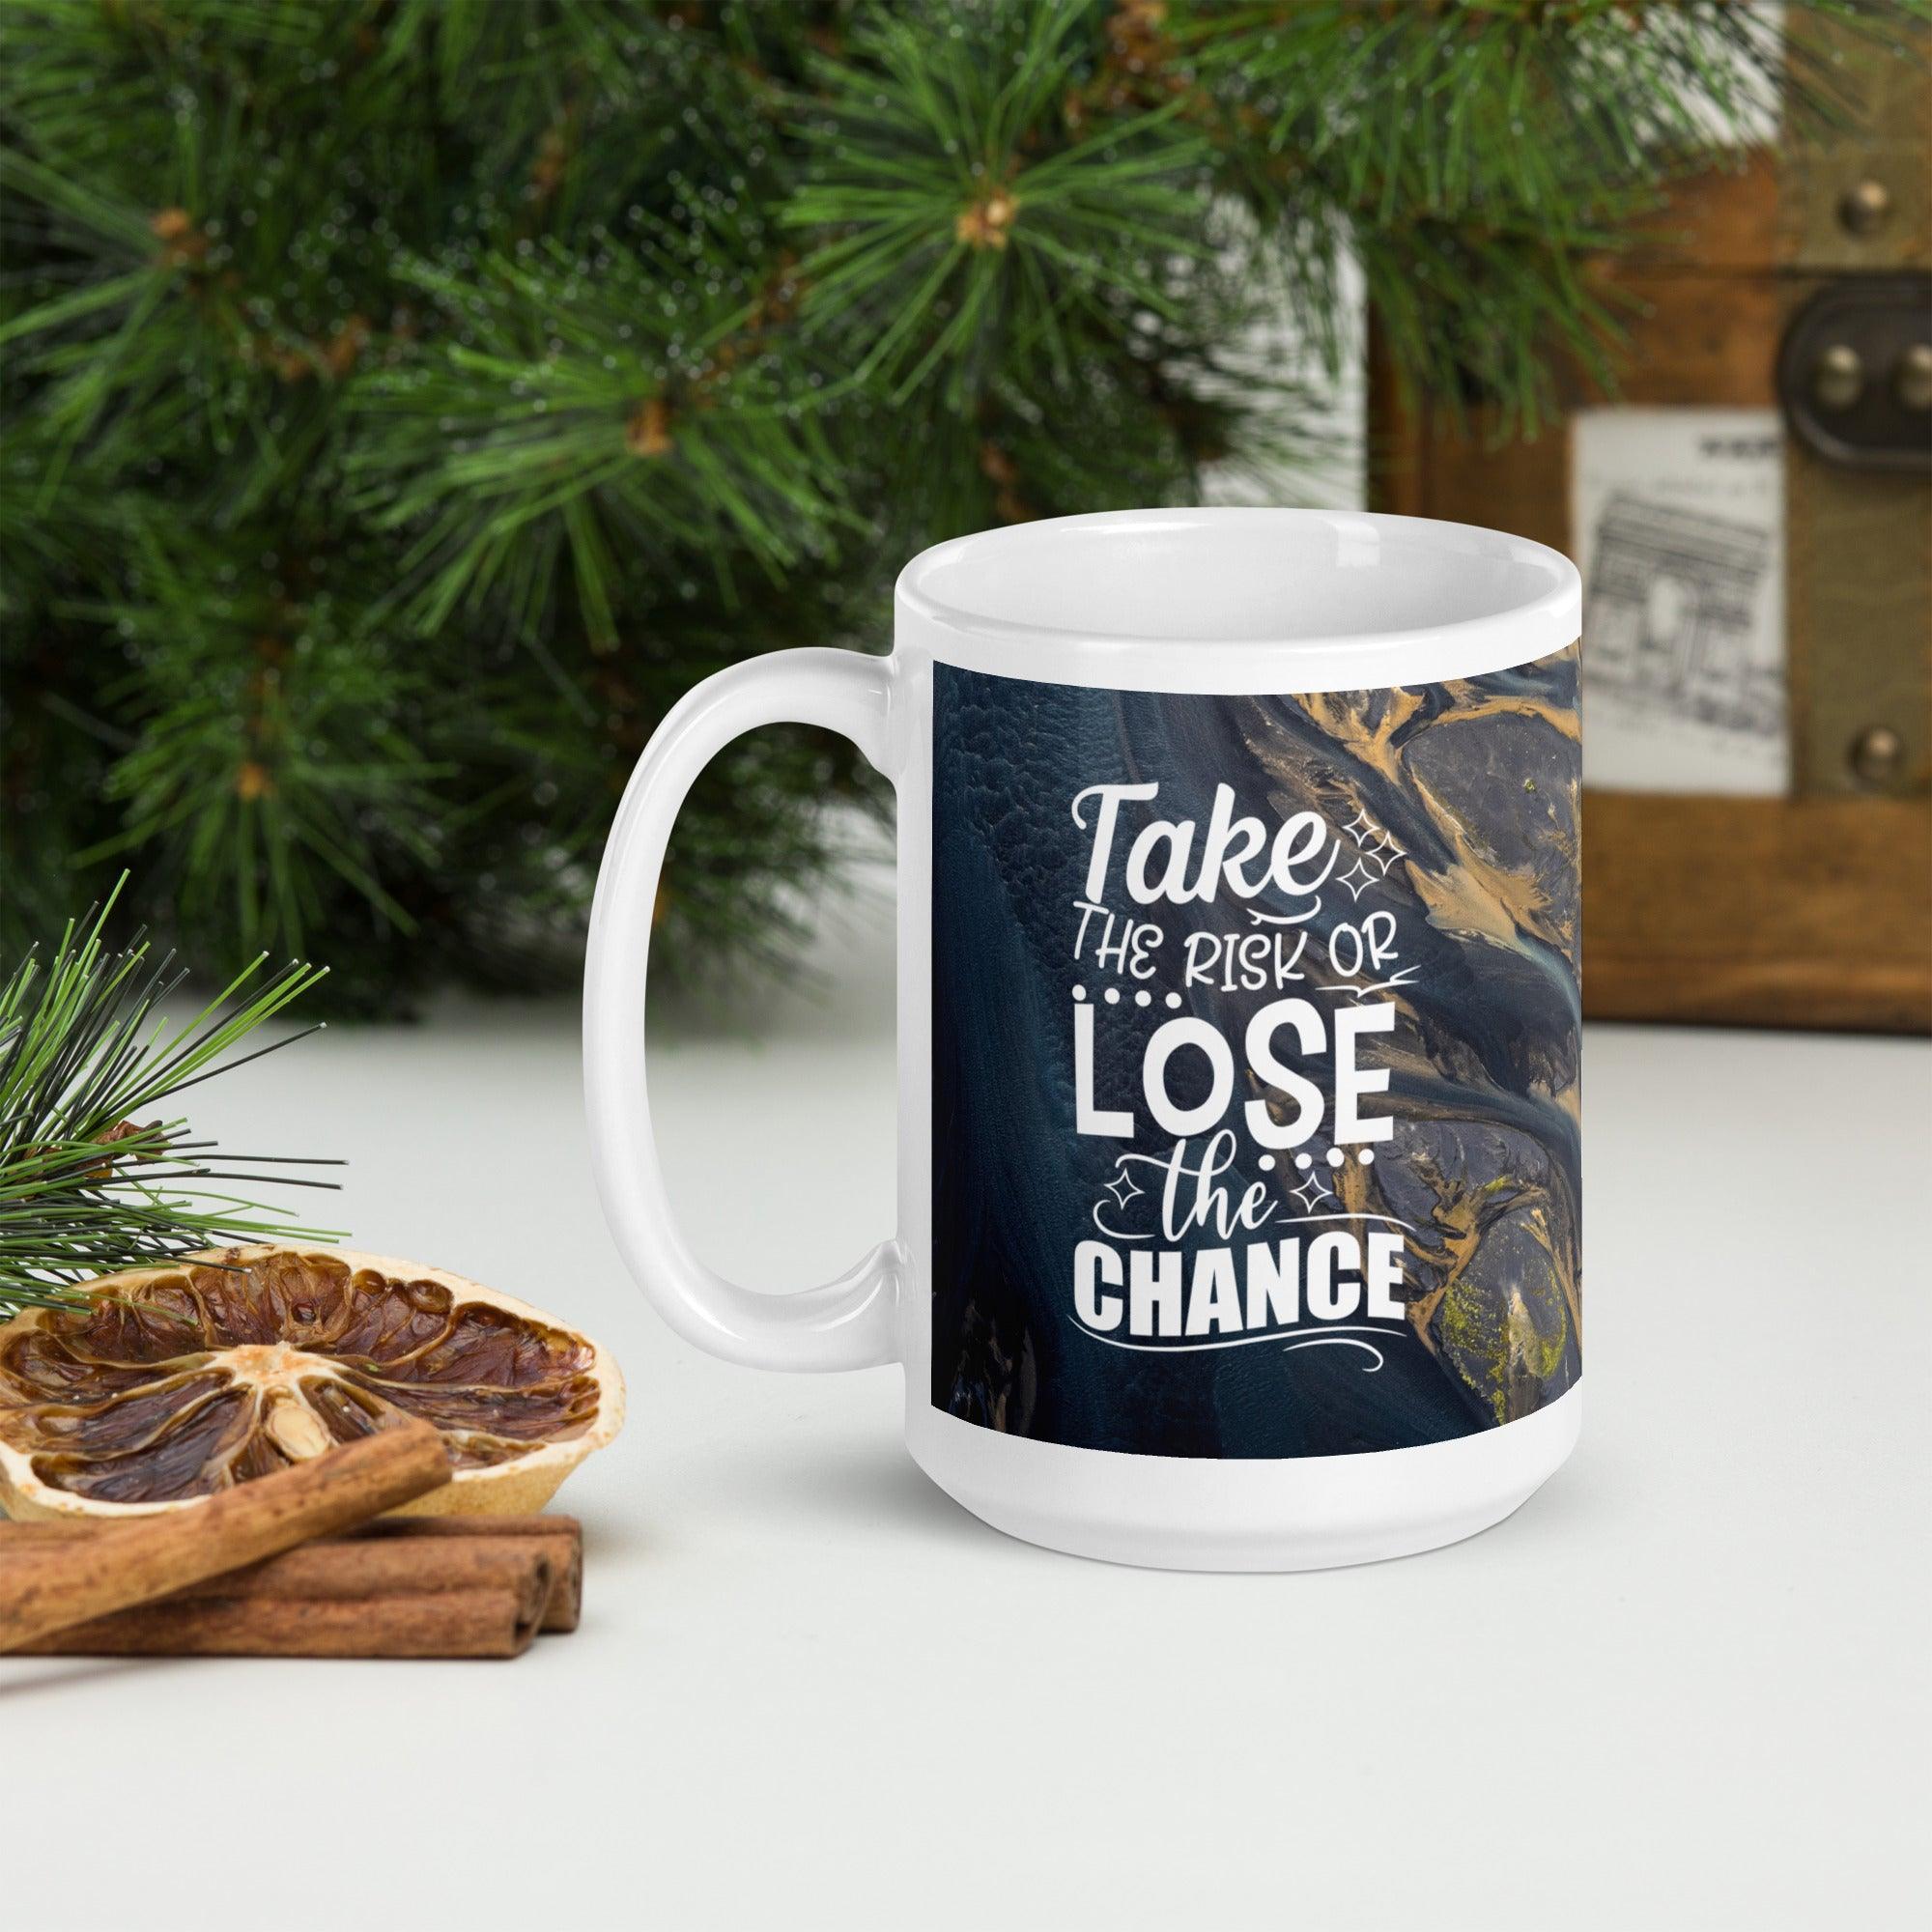 Take The Risk Or Lose The Chance | White glossy mug - Affirm Effect